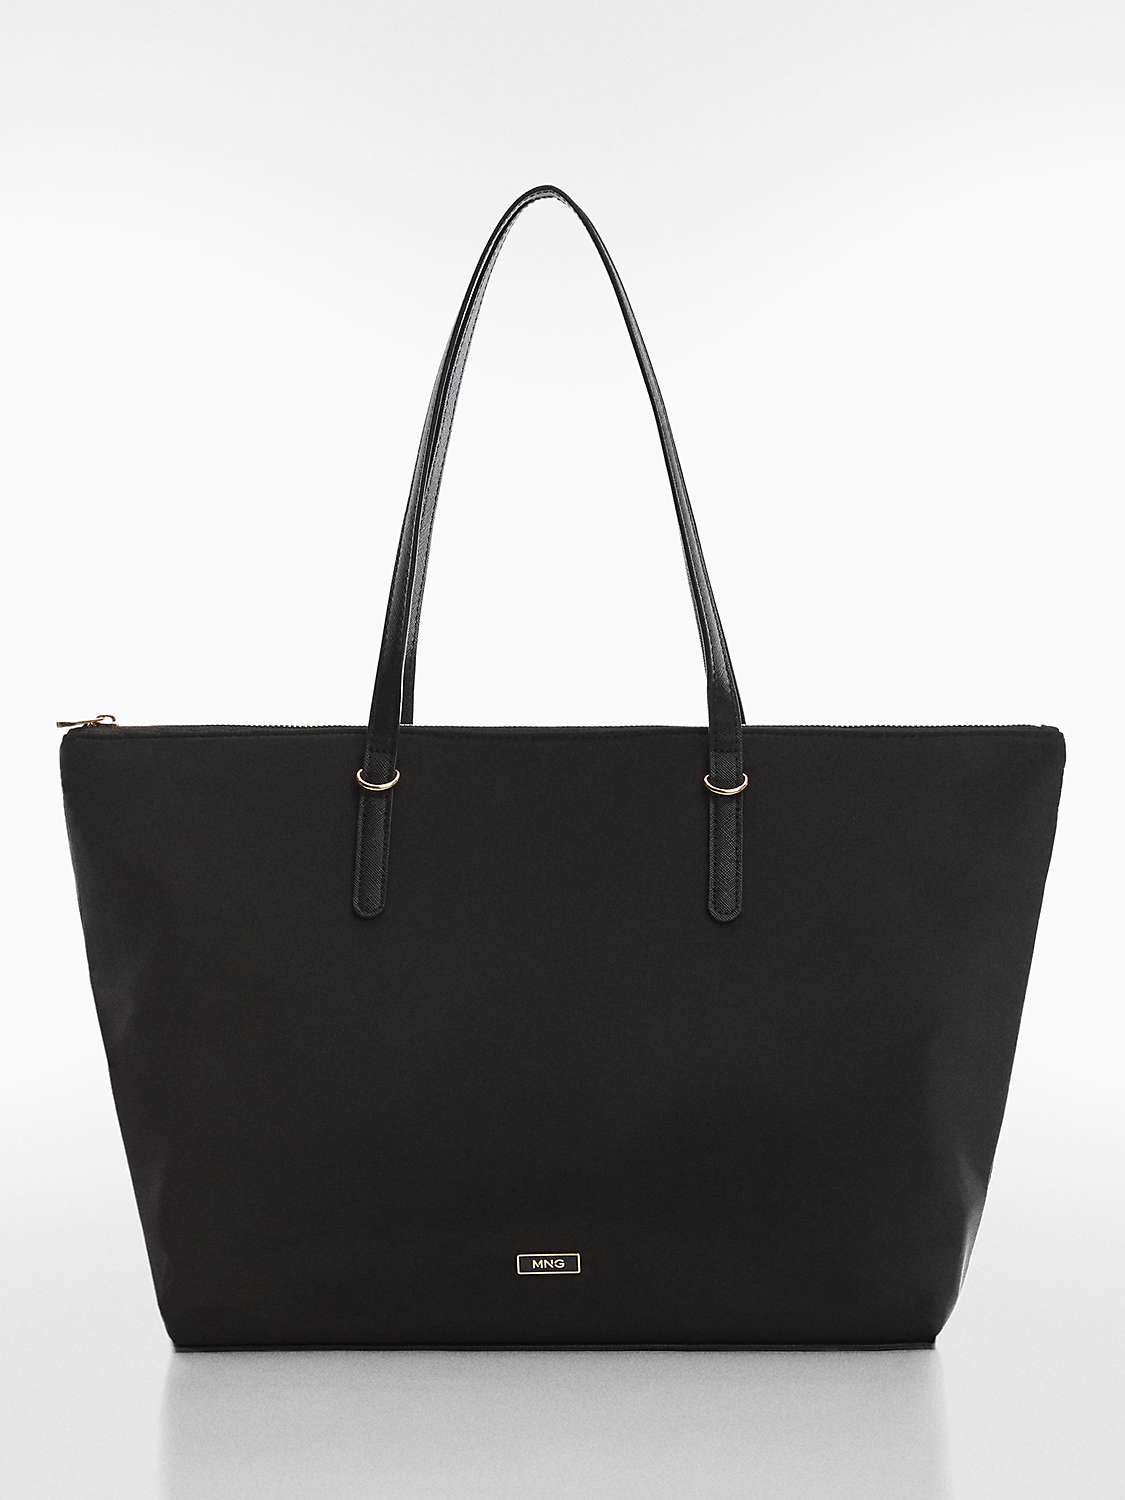 Buy Mango Julia Recycled Technical Fabric Tote Bag, Black Online at johnlewis.com